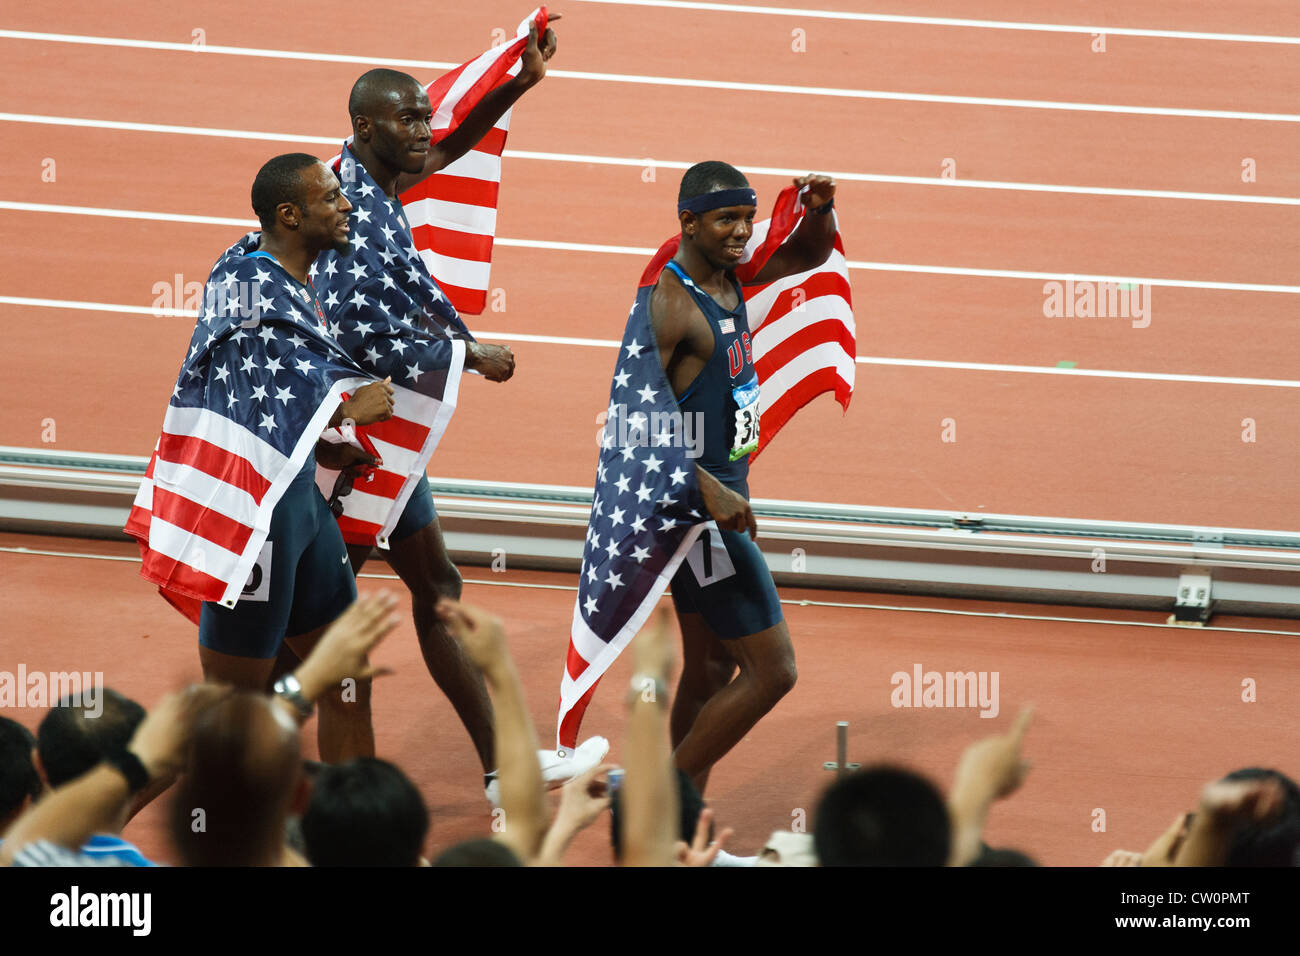 Taylor Clement and Jackson take a victory lap after USA sweeps men's 400 meter hurdles winning gold silver bronze medals Stock Photo